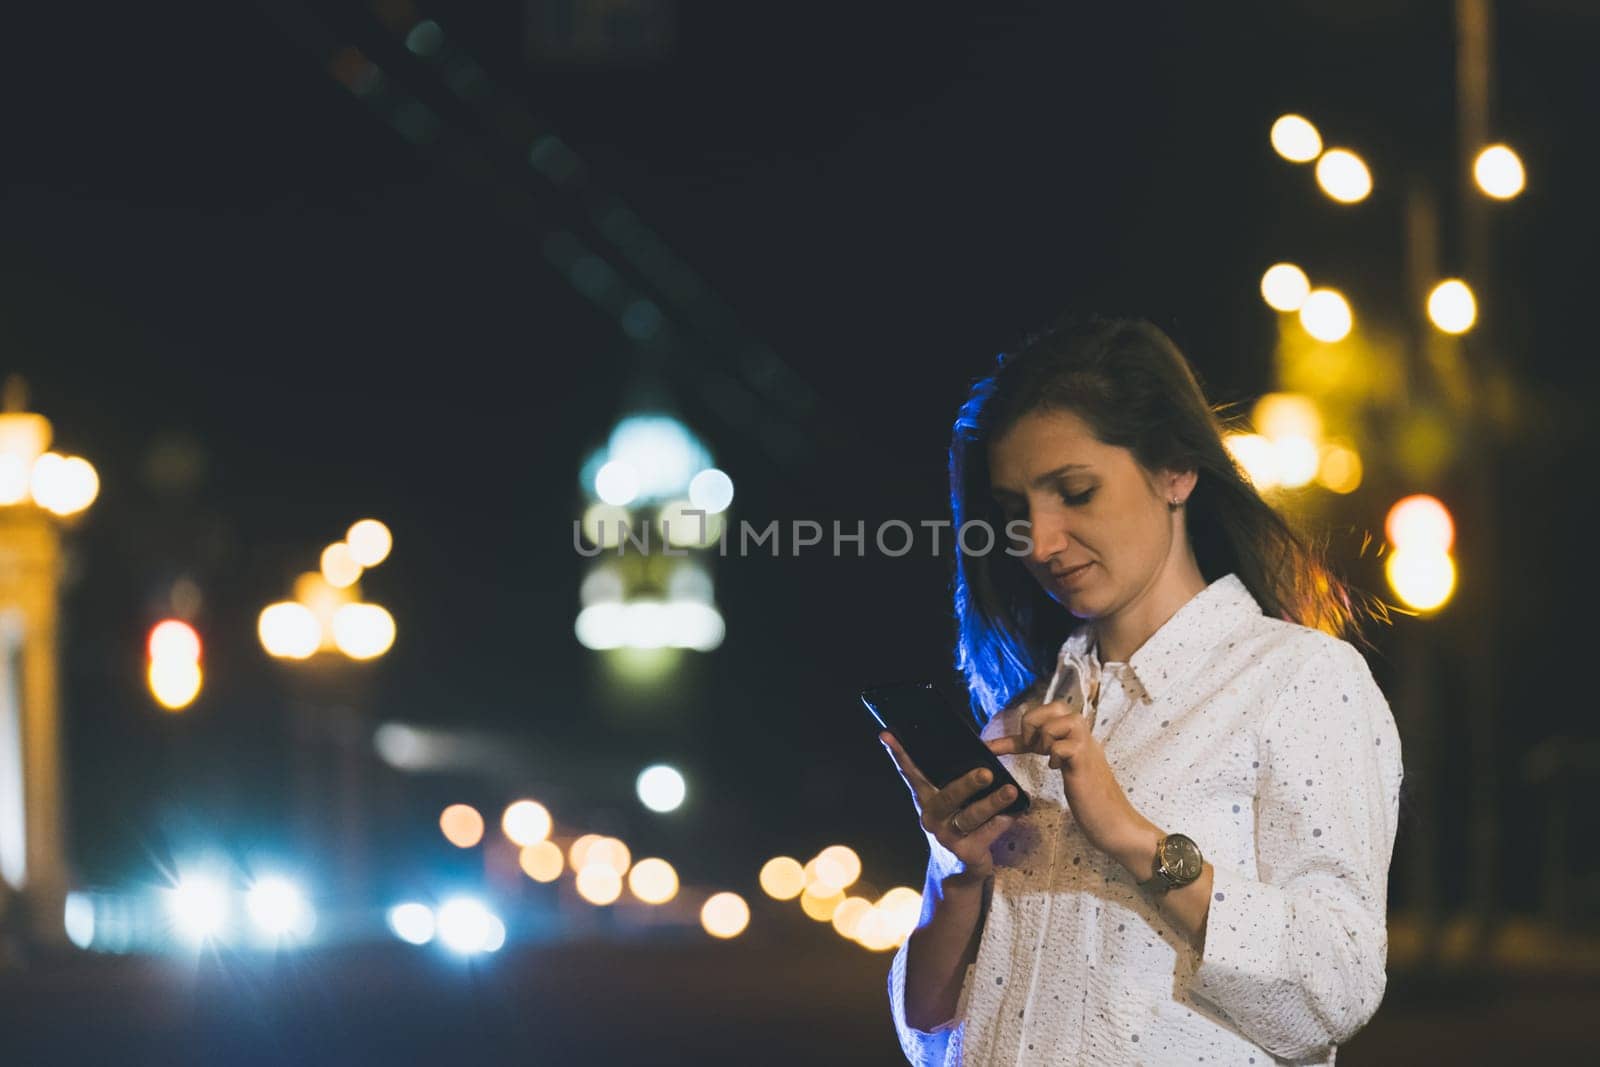 attractive girl in white suit using smartphone in night, light reflection with copy space area for advertising, young woman smiling with mobile in hands